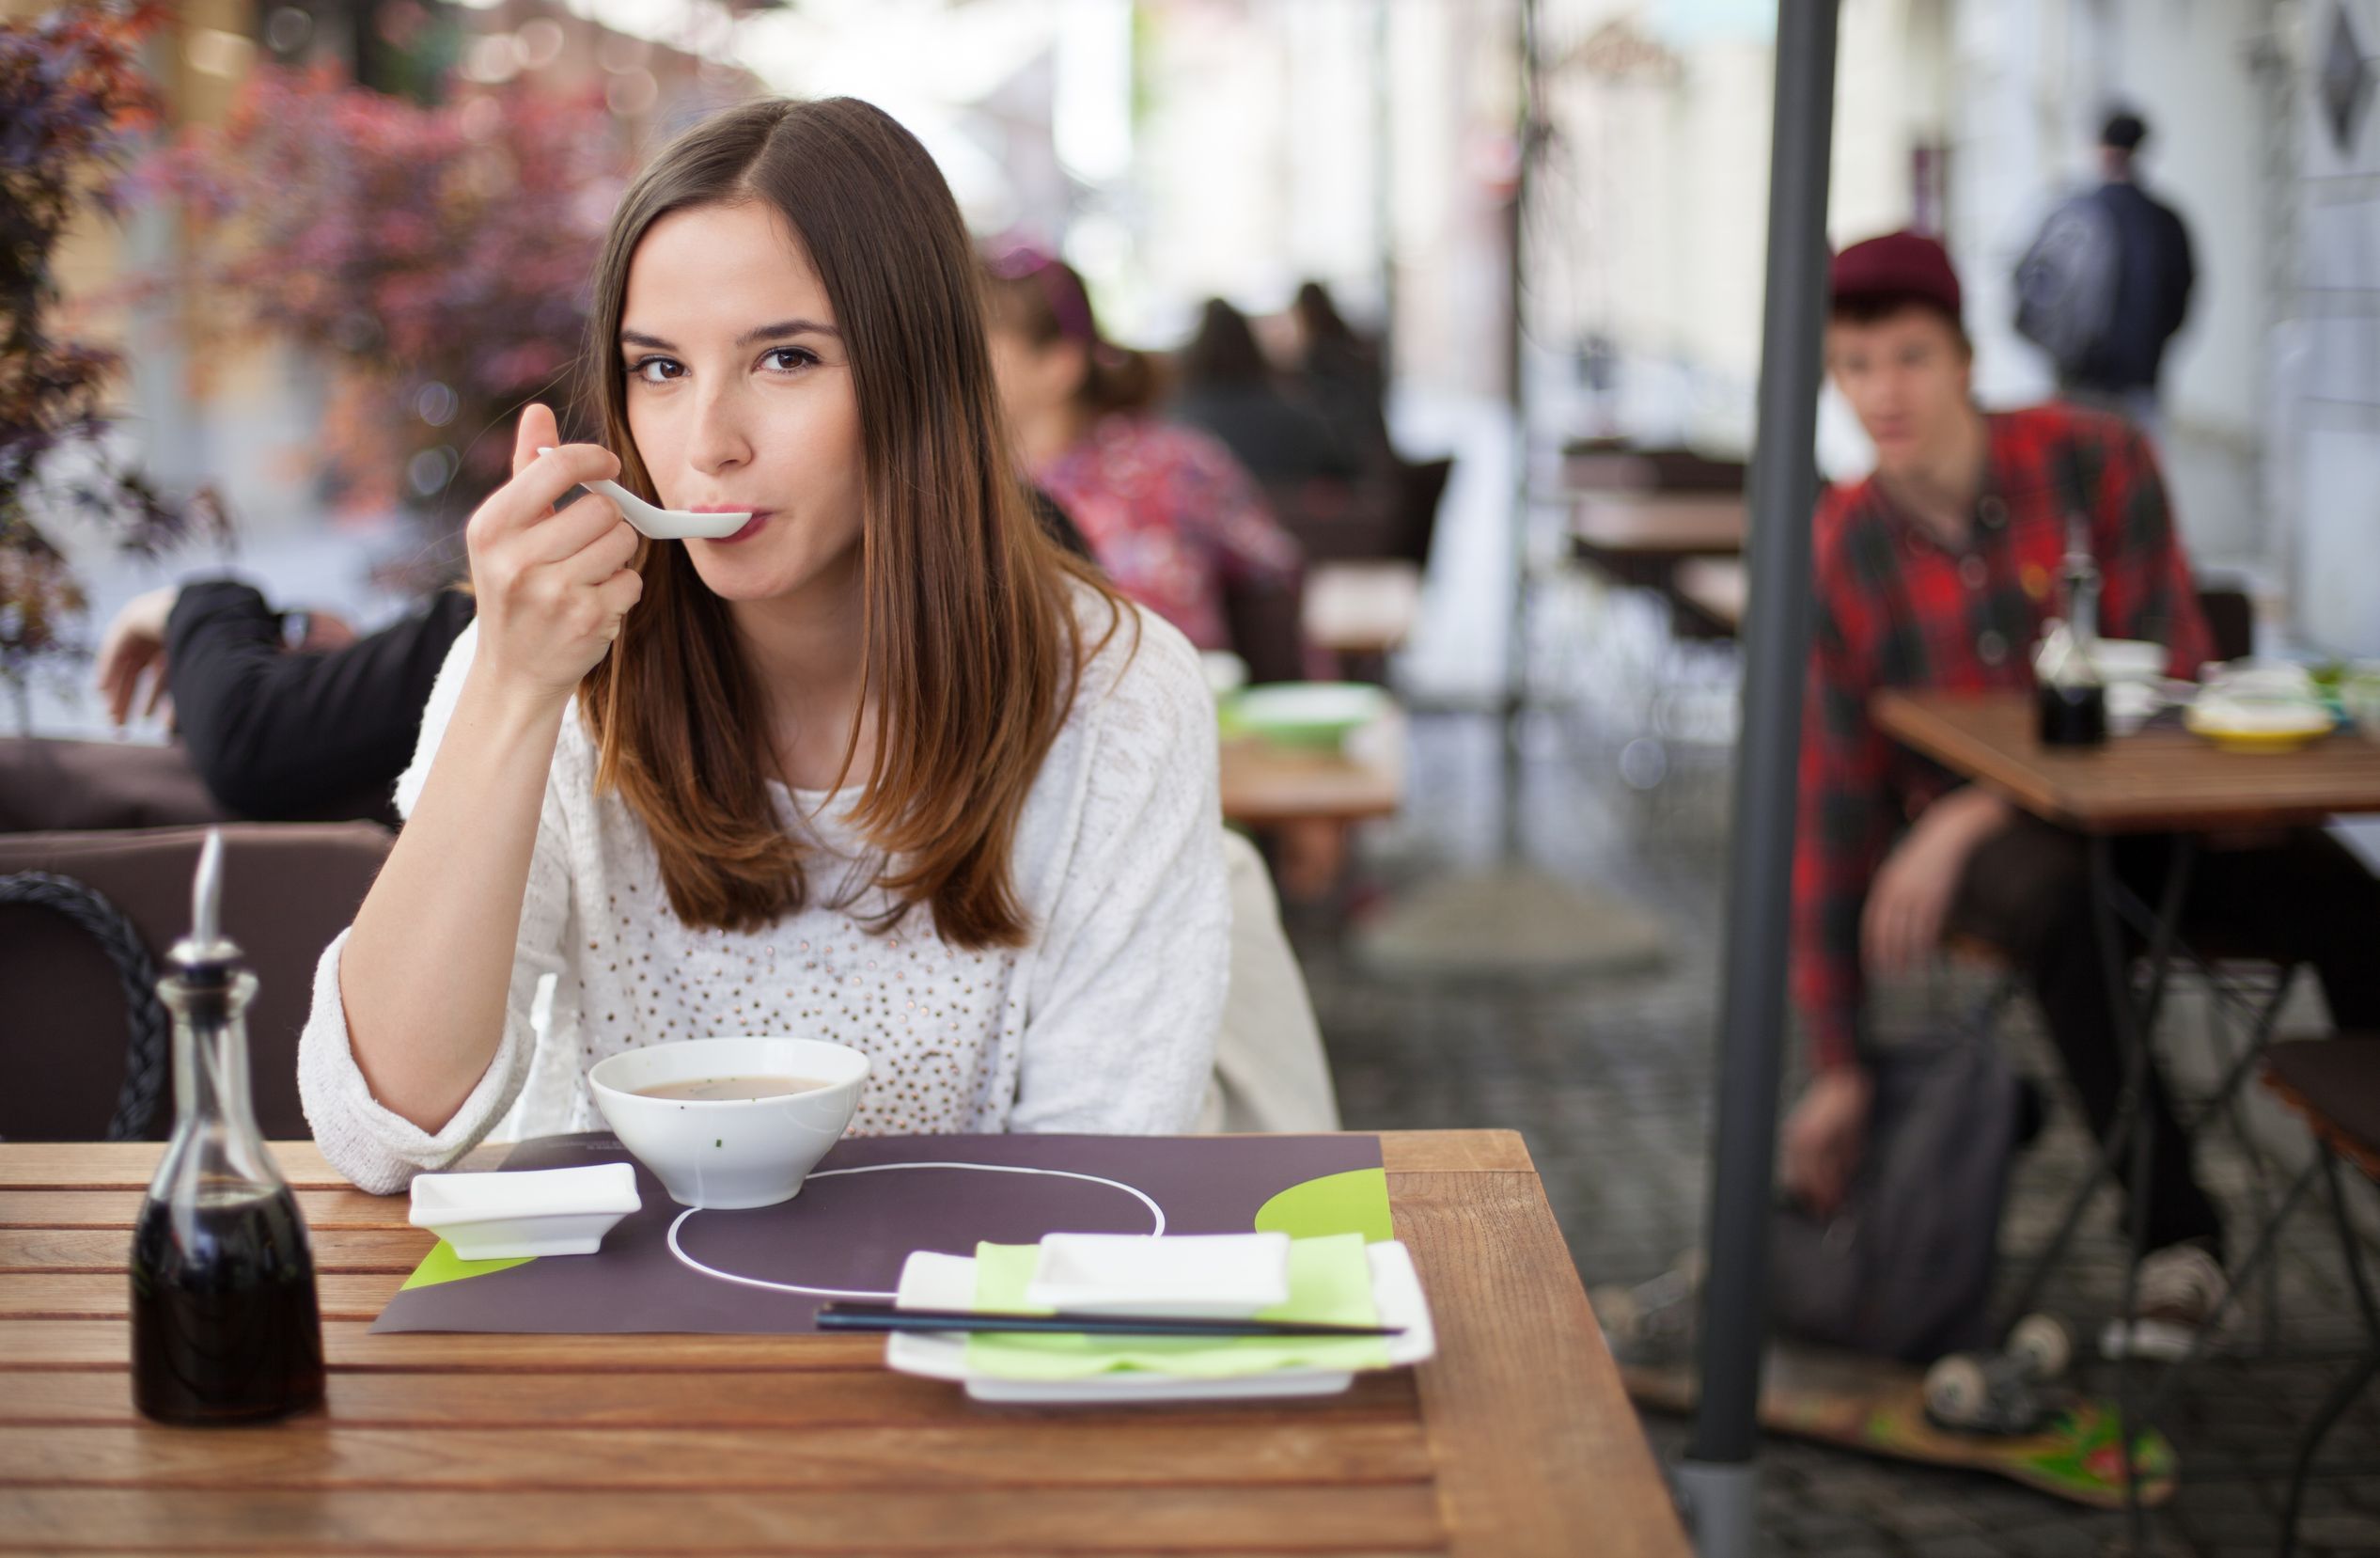 19754646 - young woman eating soup in an restaurant garden